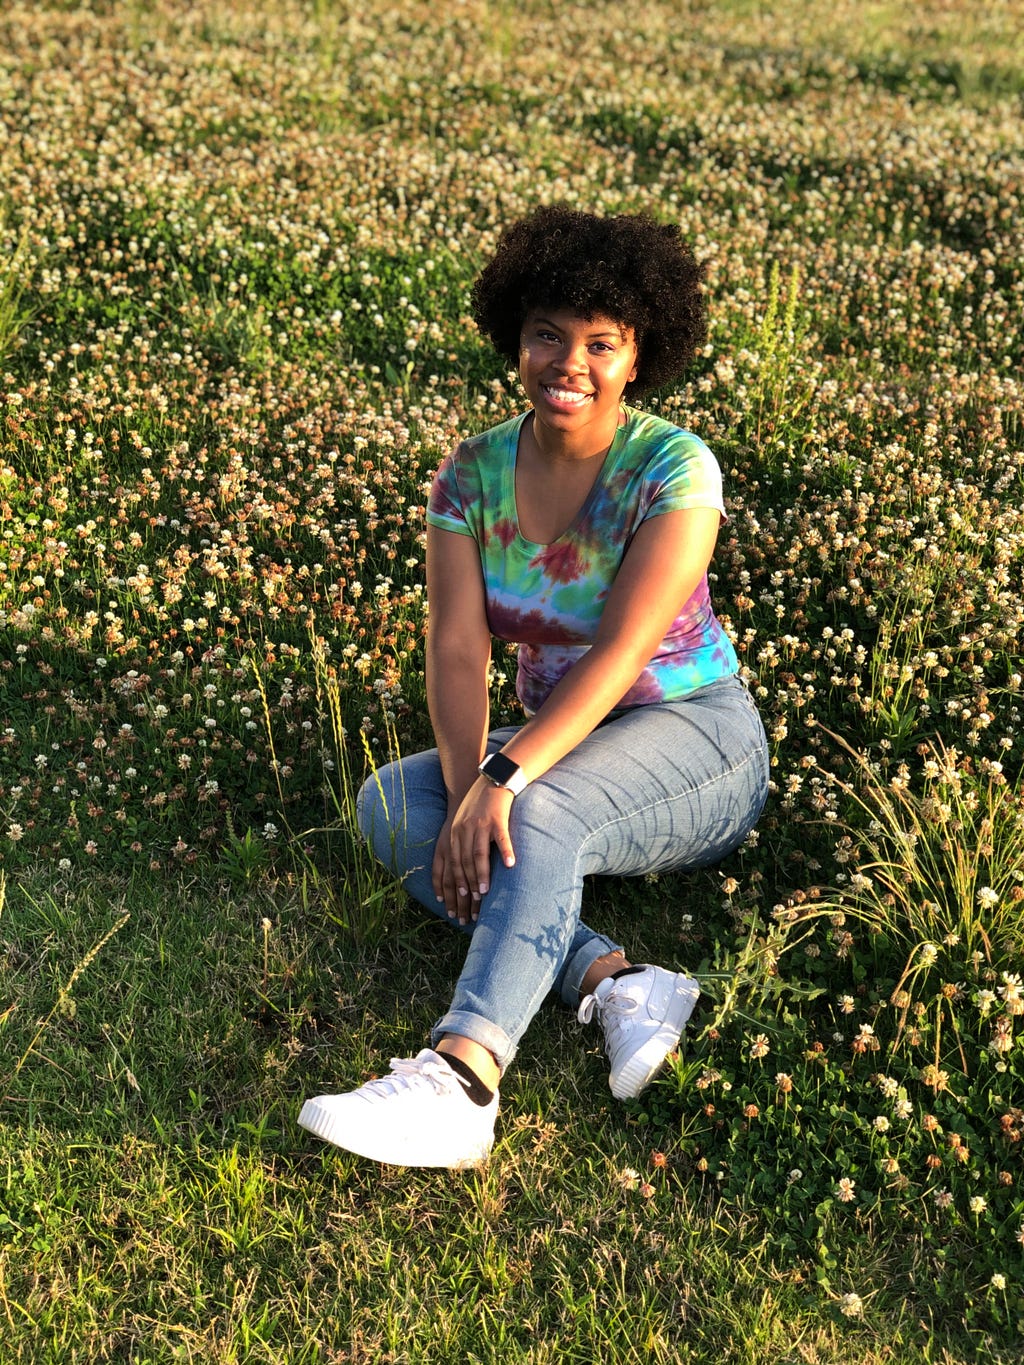 A black woman w/ an afro wearing a tie-dye t-shirt,blue jeans, and white sneakers sitting in a field.